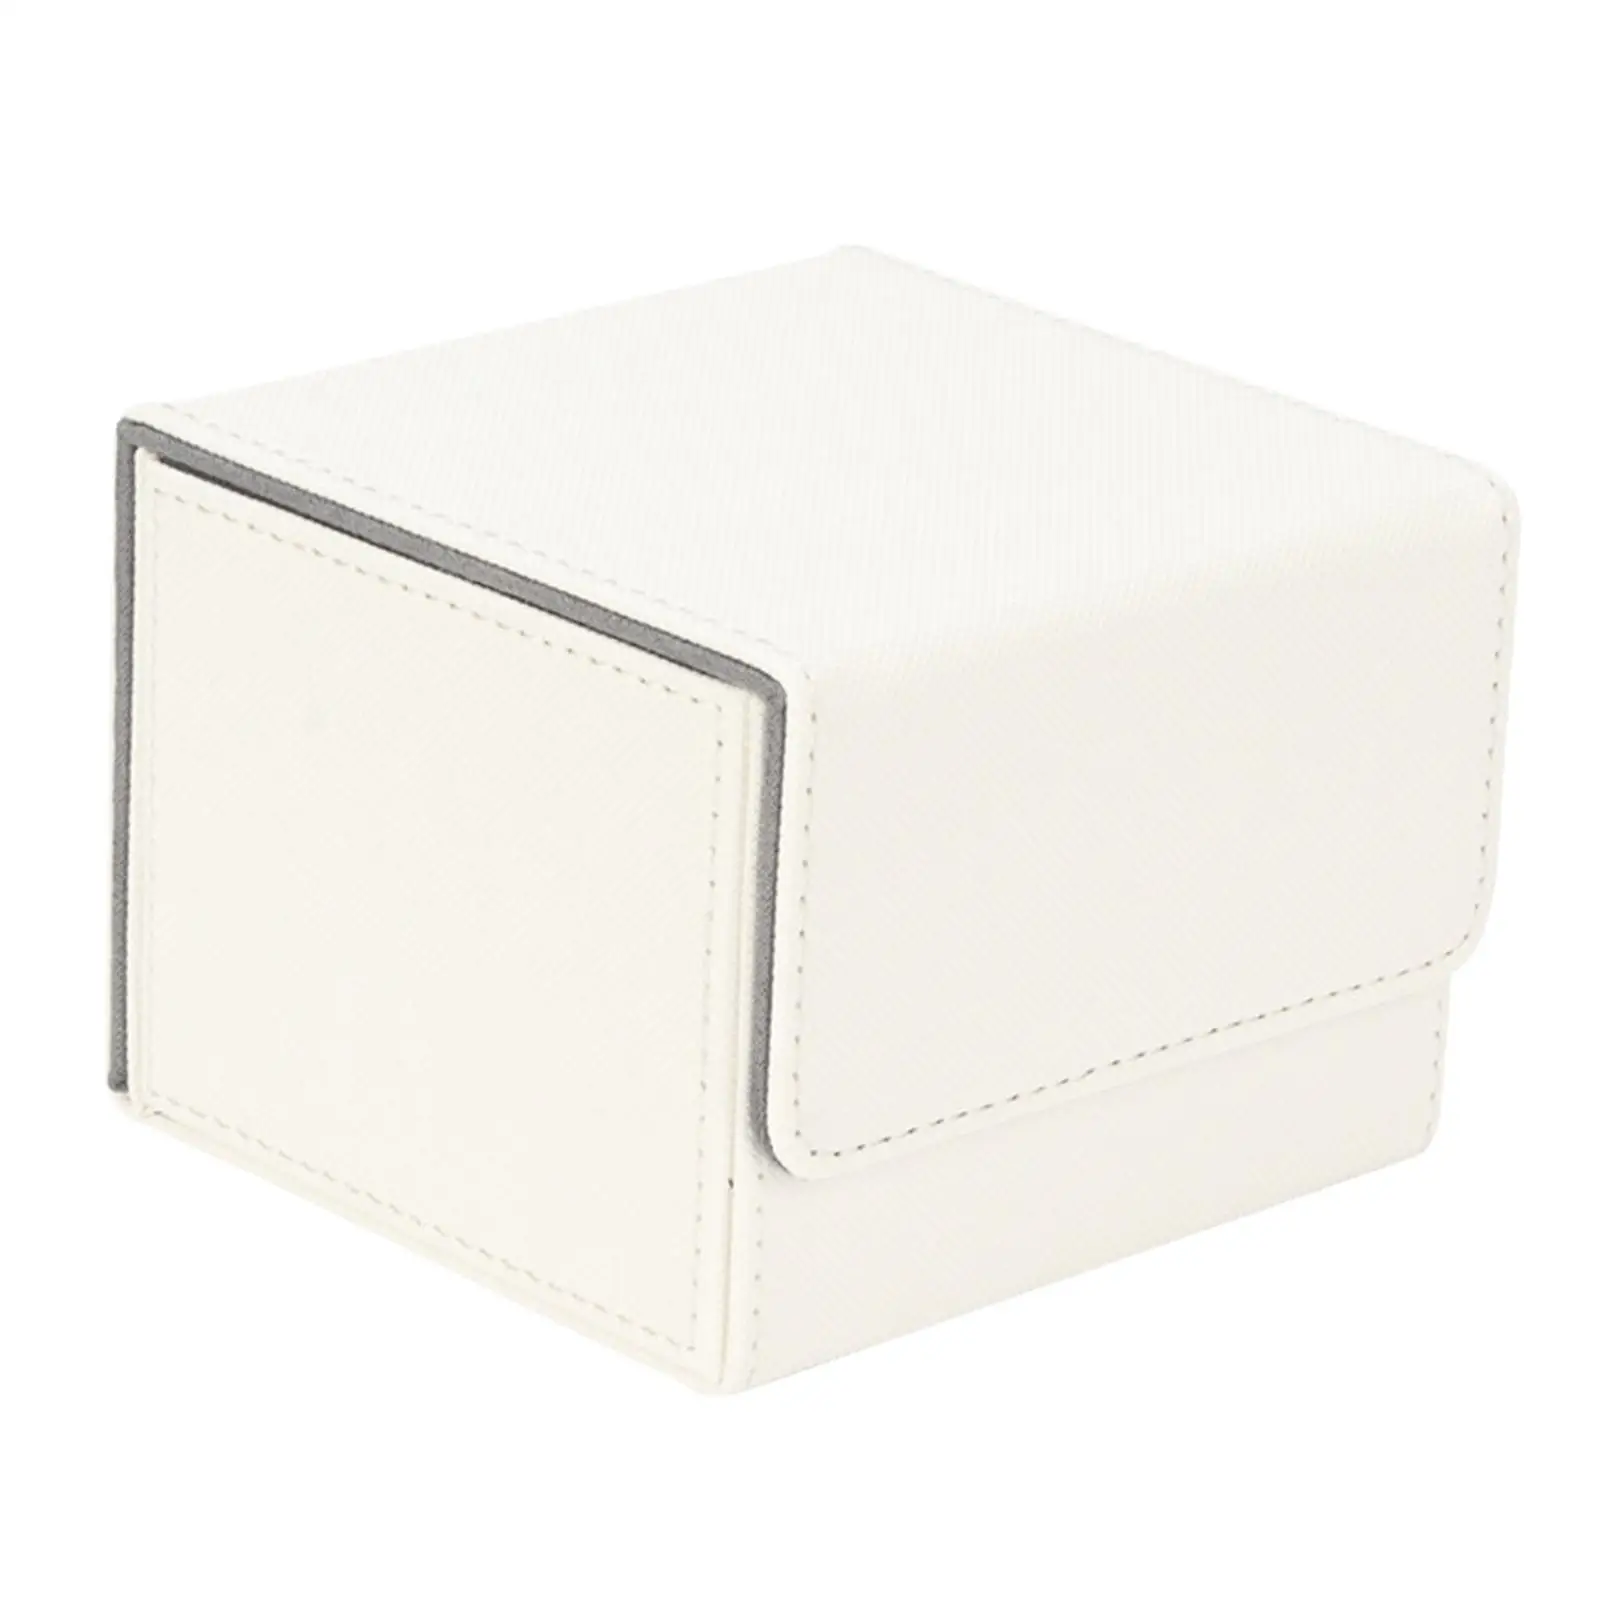 Card Deck Case 140+ Sleeved Cards Card Organization Box for Business Cards Game Cards